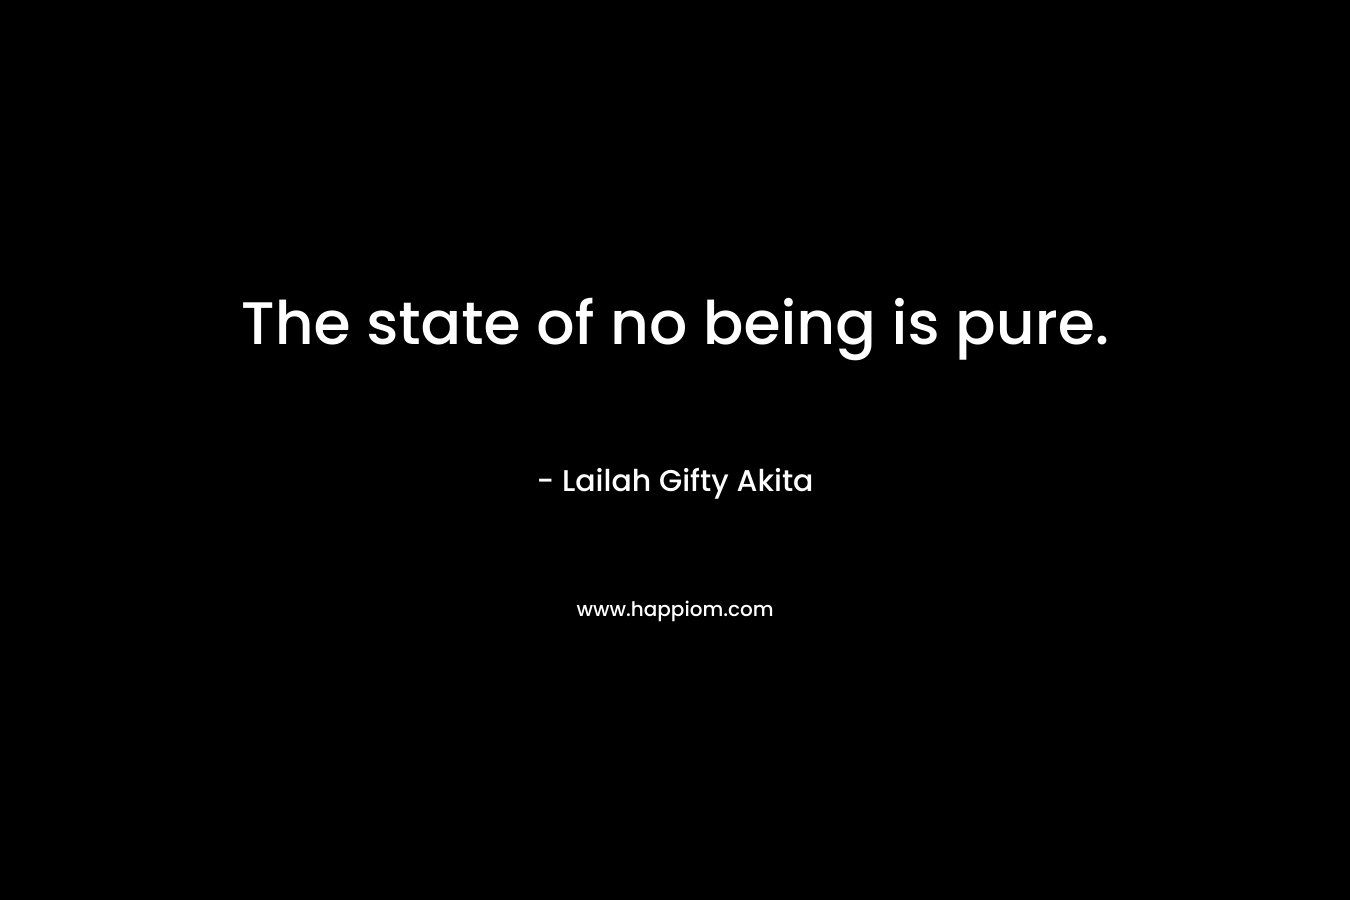 The state of no being is pure.